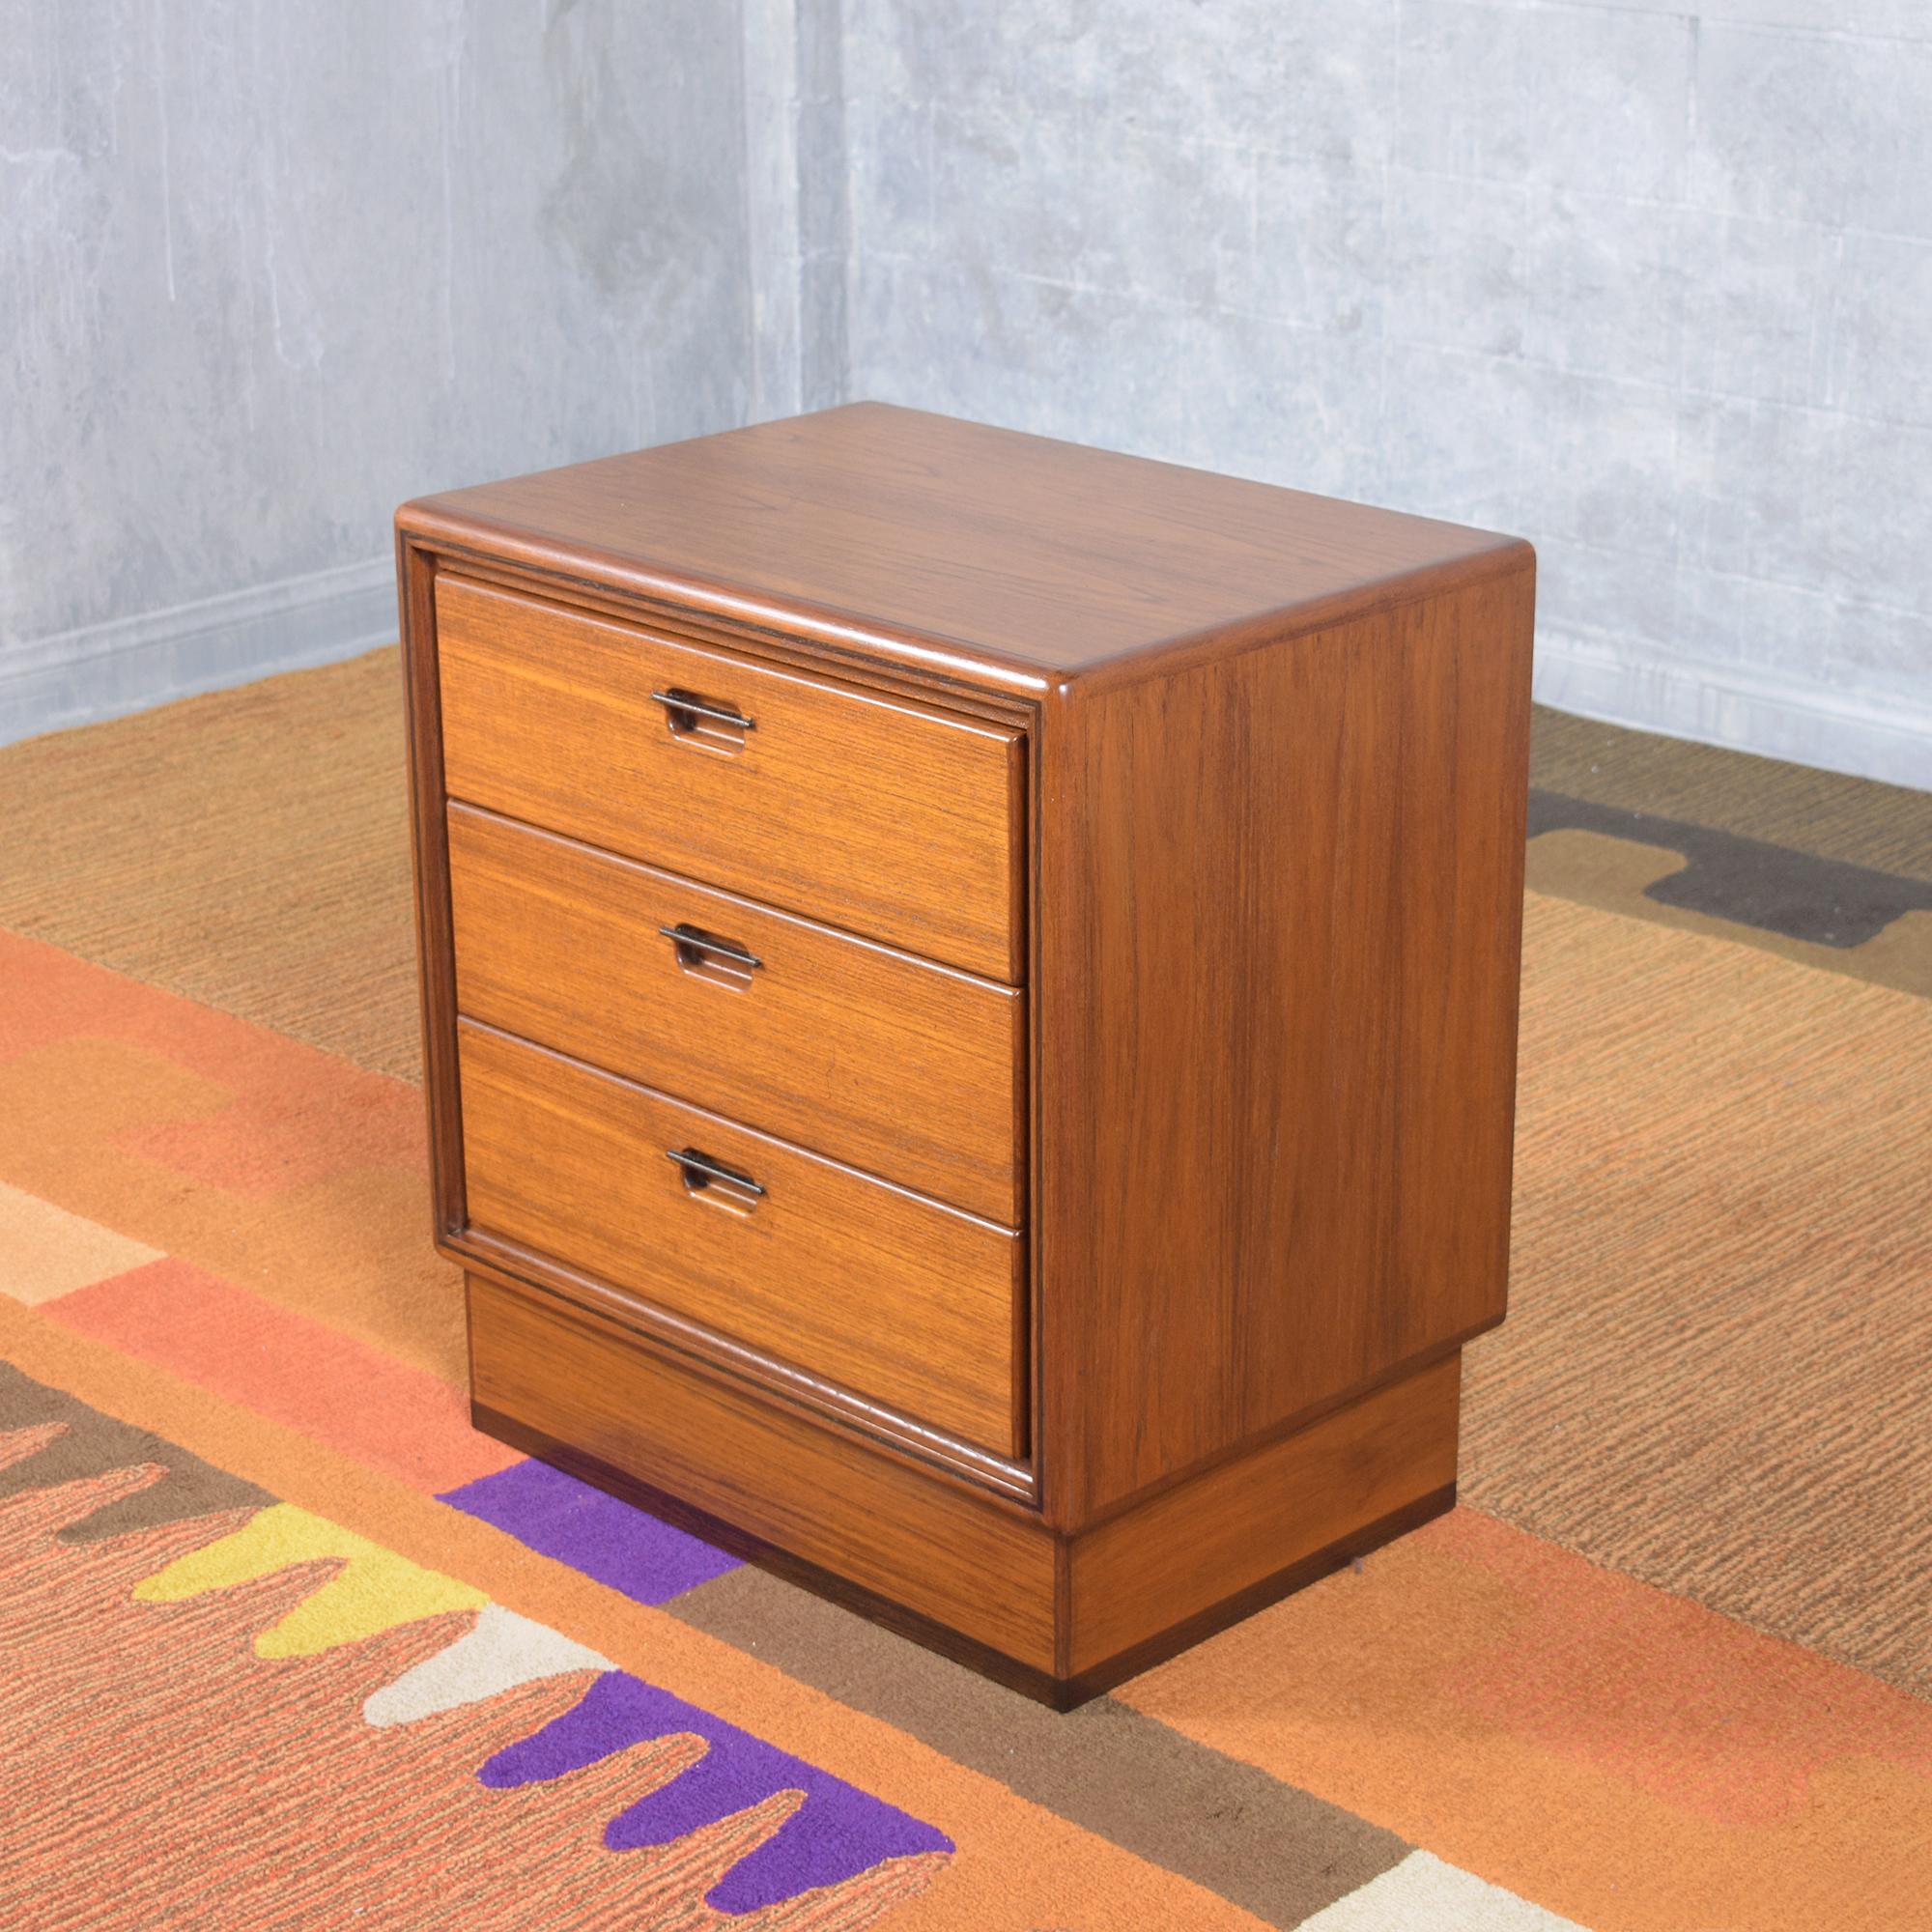 Lacquer Restored 1960s Danish Modern Teak Nightstand with Brass Pulls & Floating Base